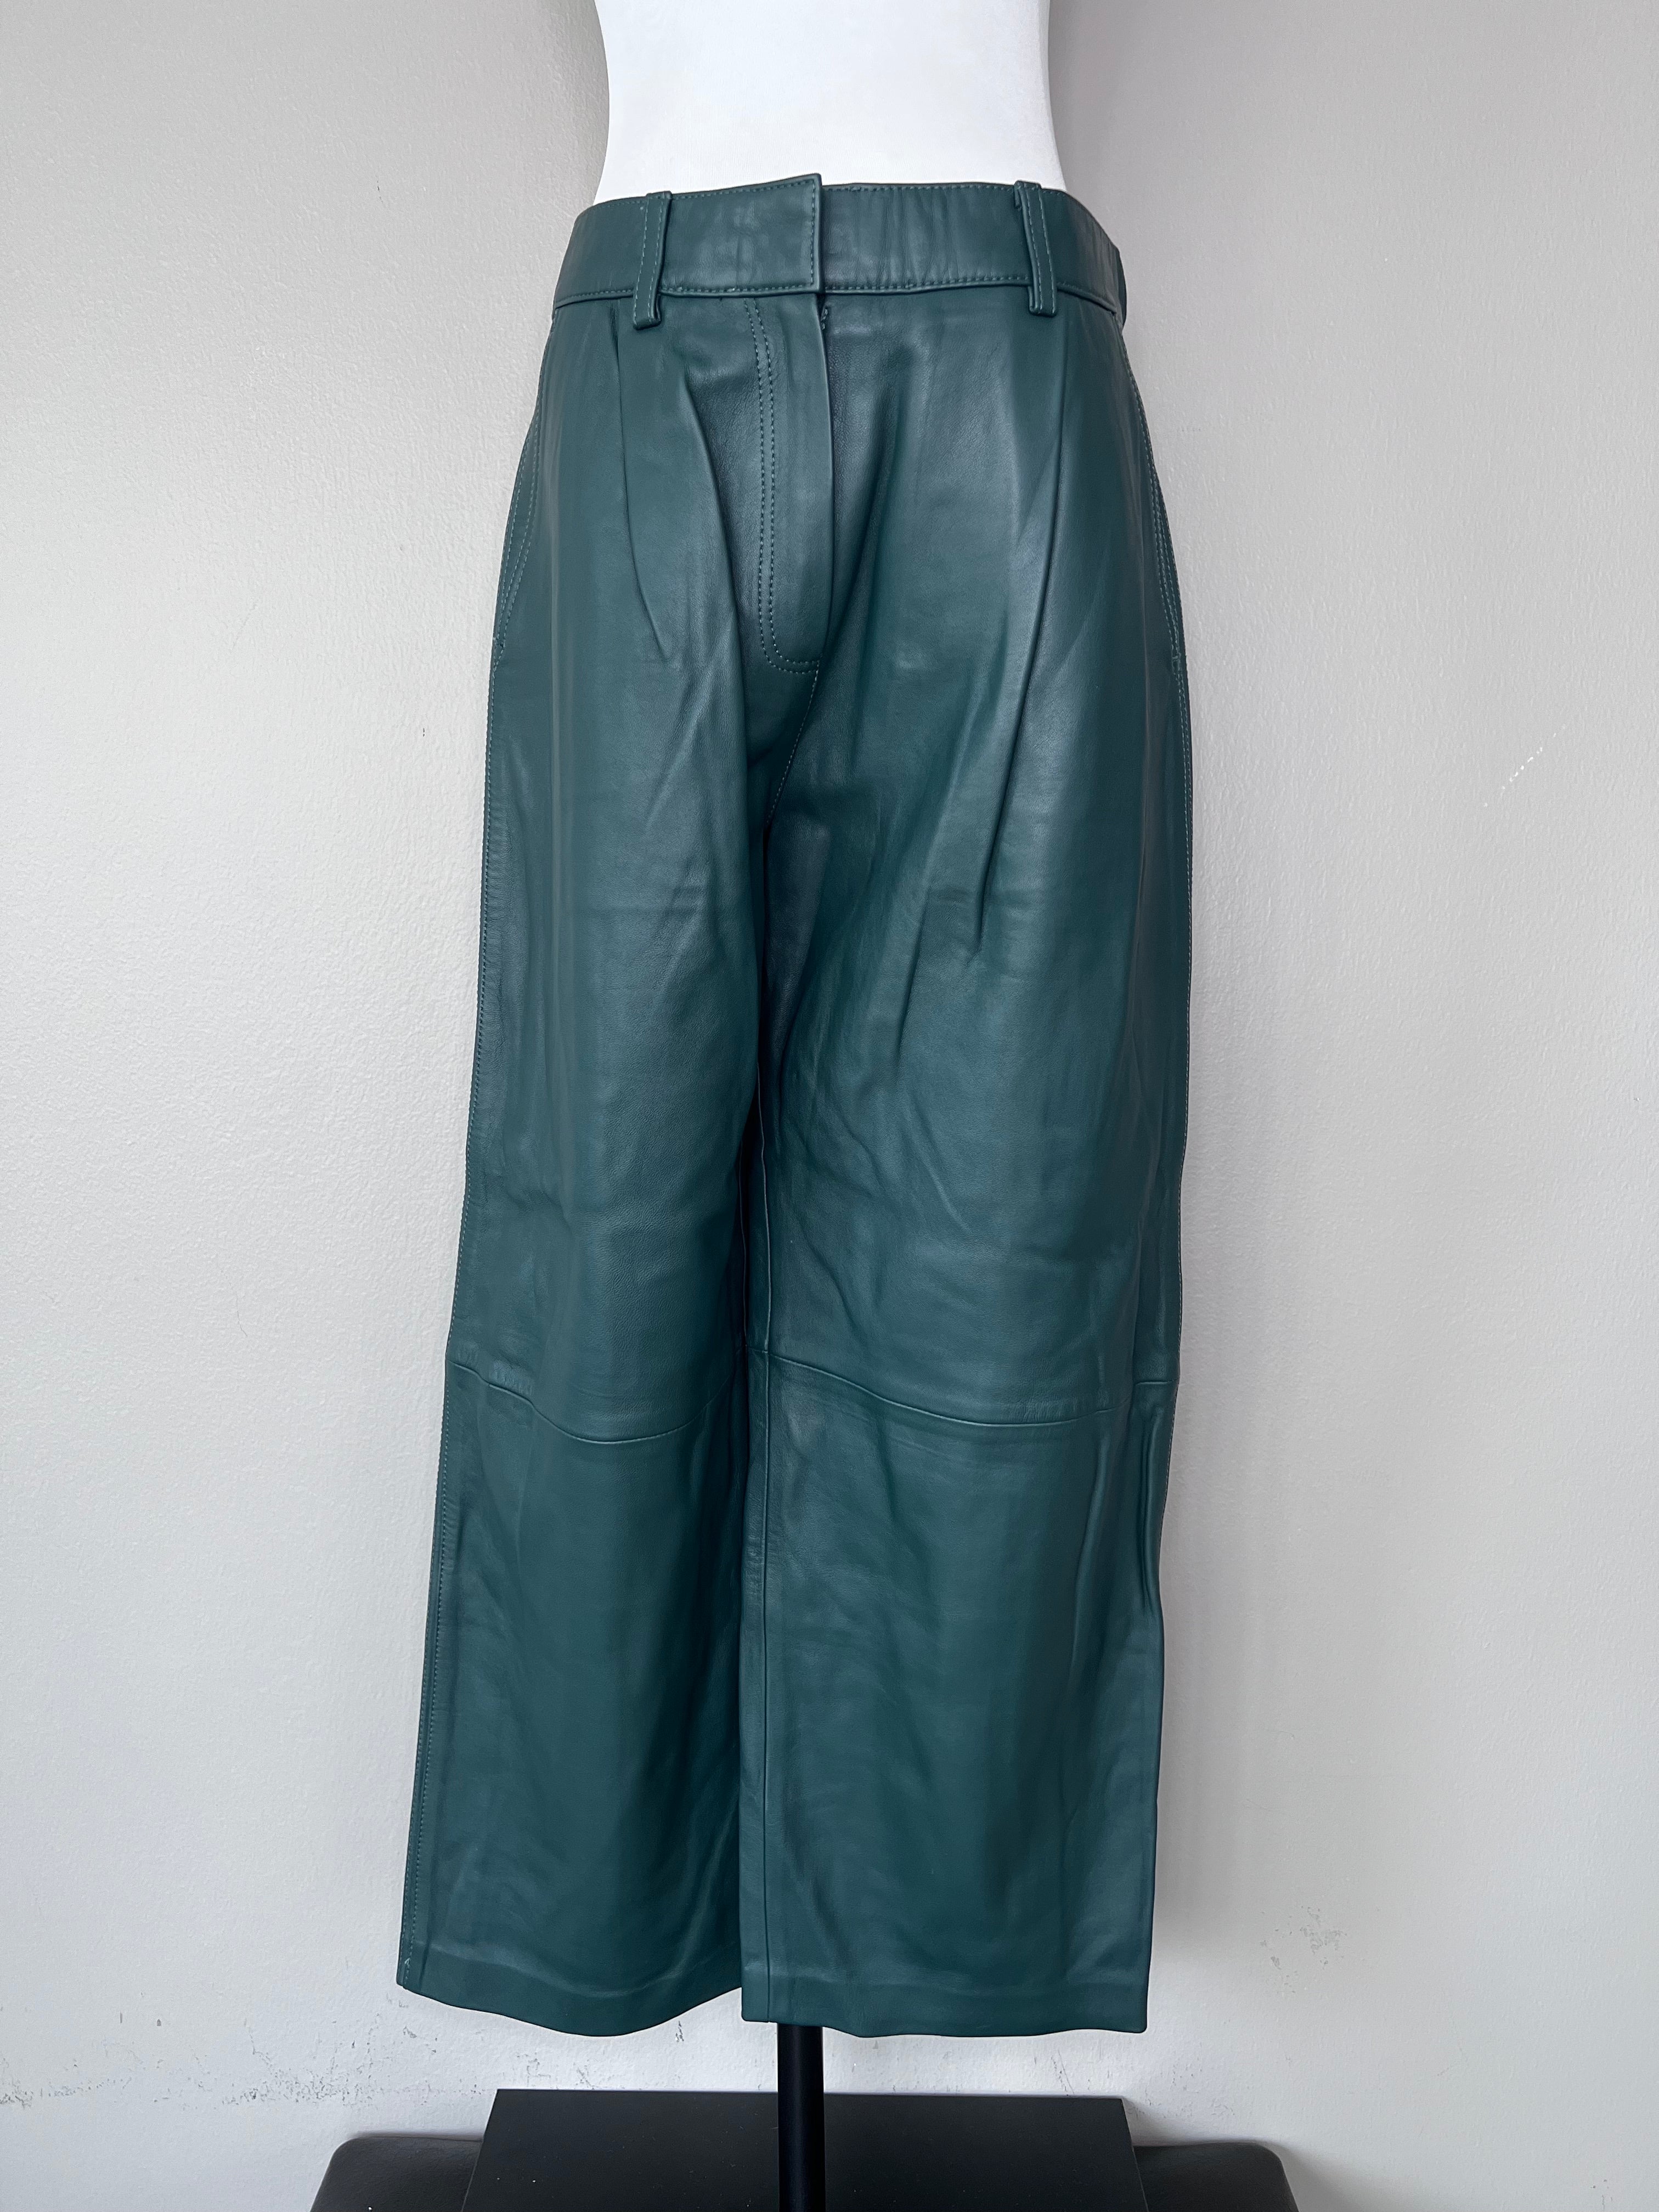 Green leather trousers with stitch detailing on the sides. - HILFIGER COLLECTION